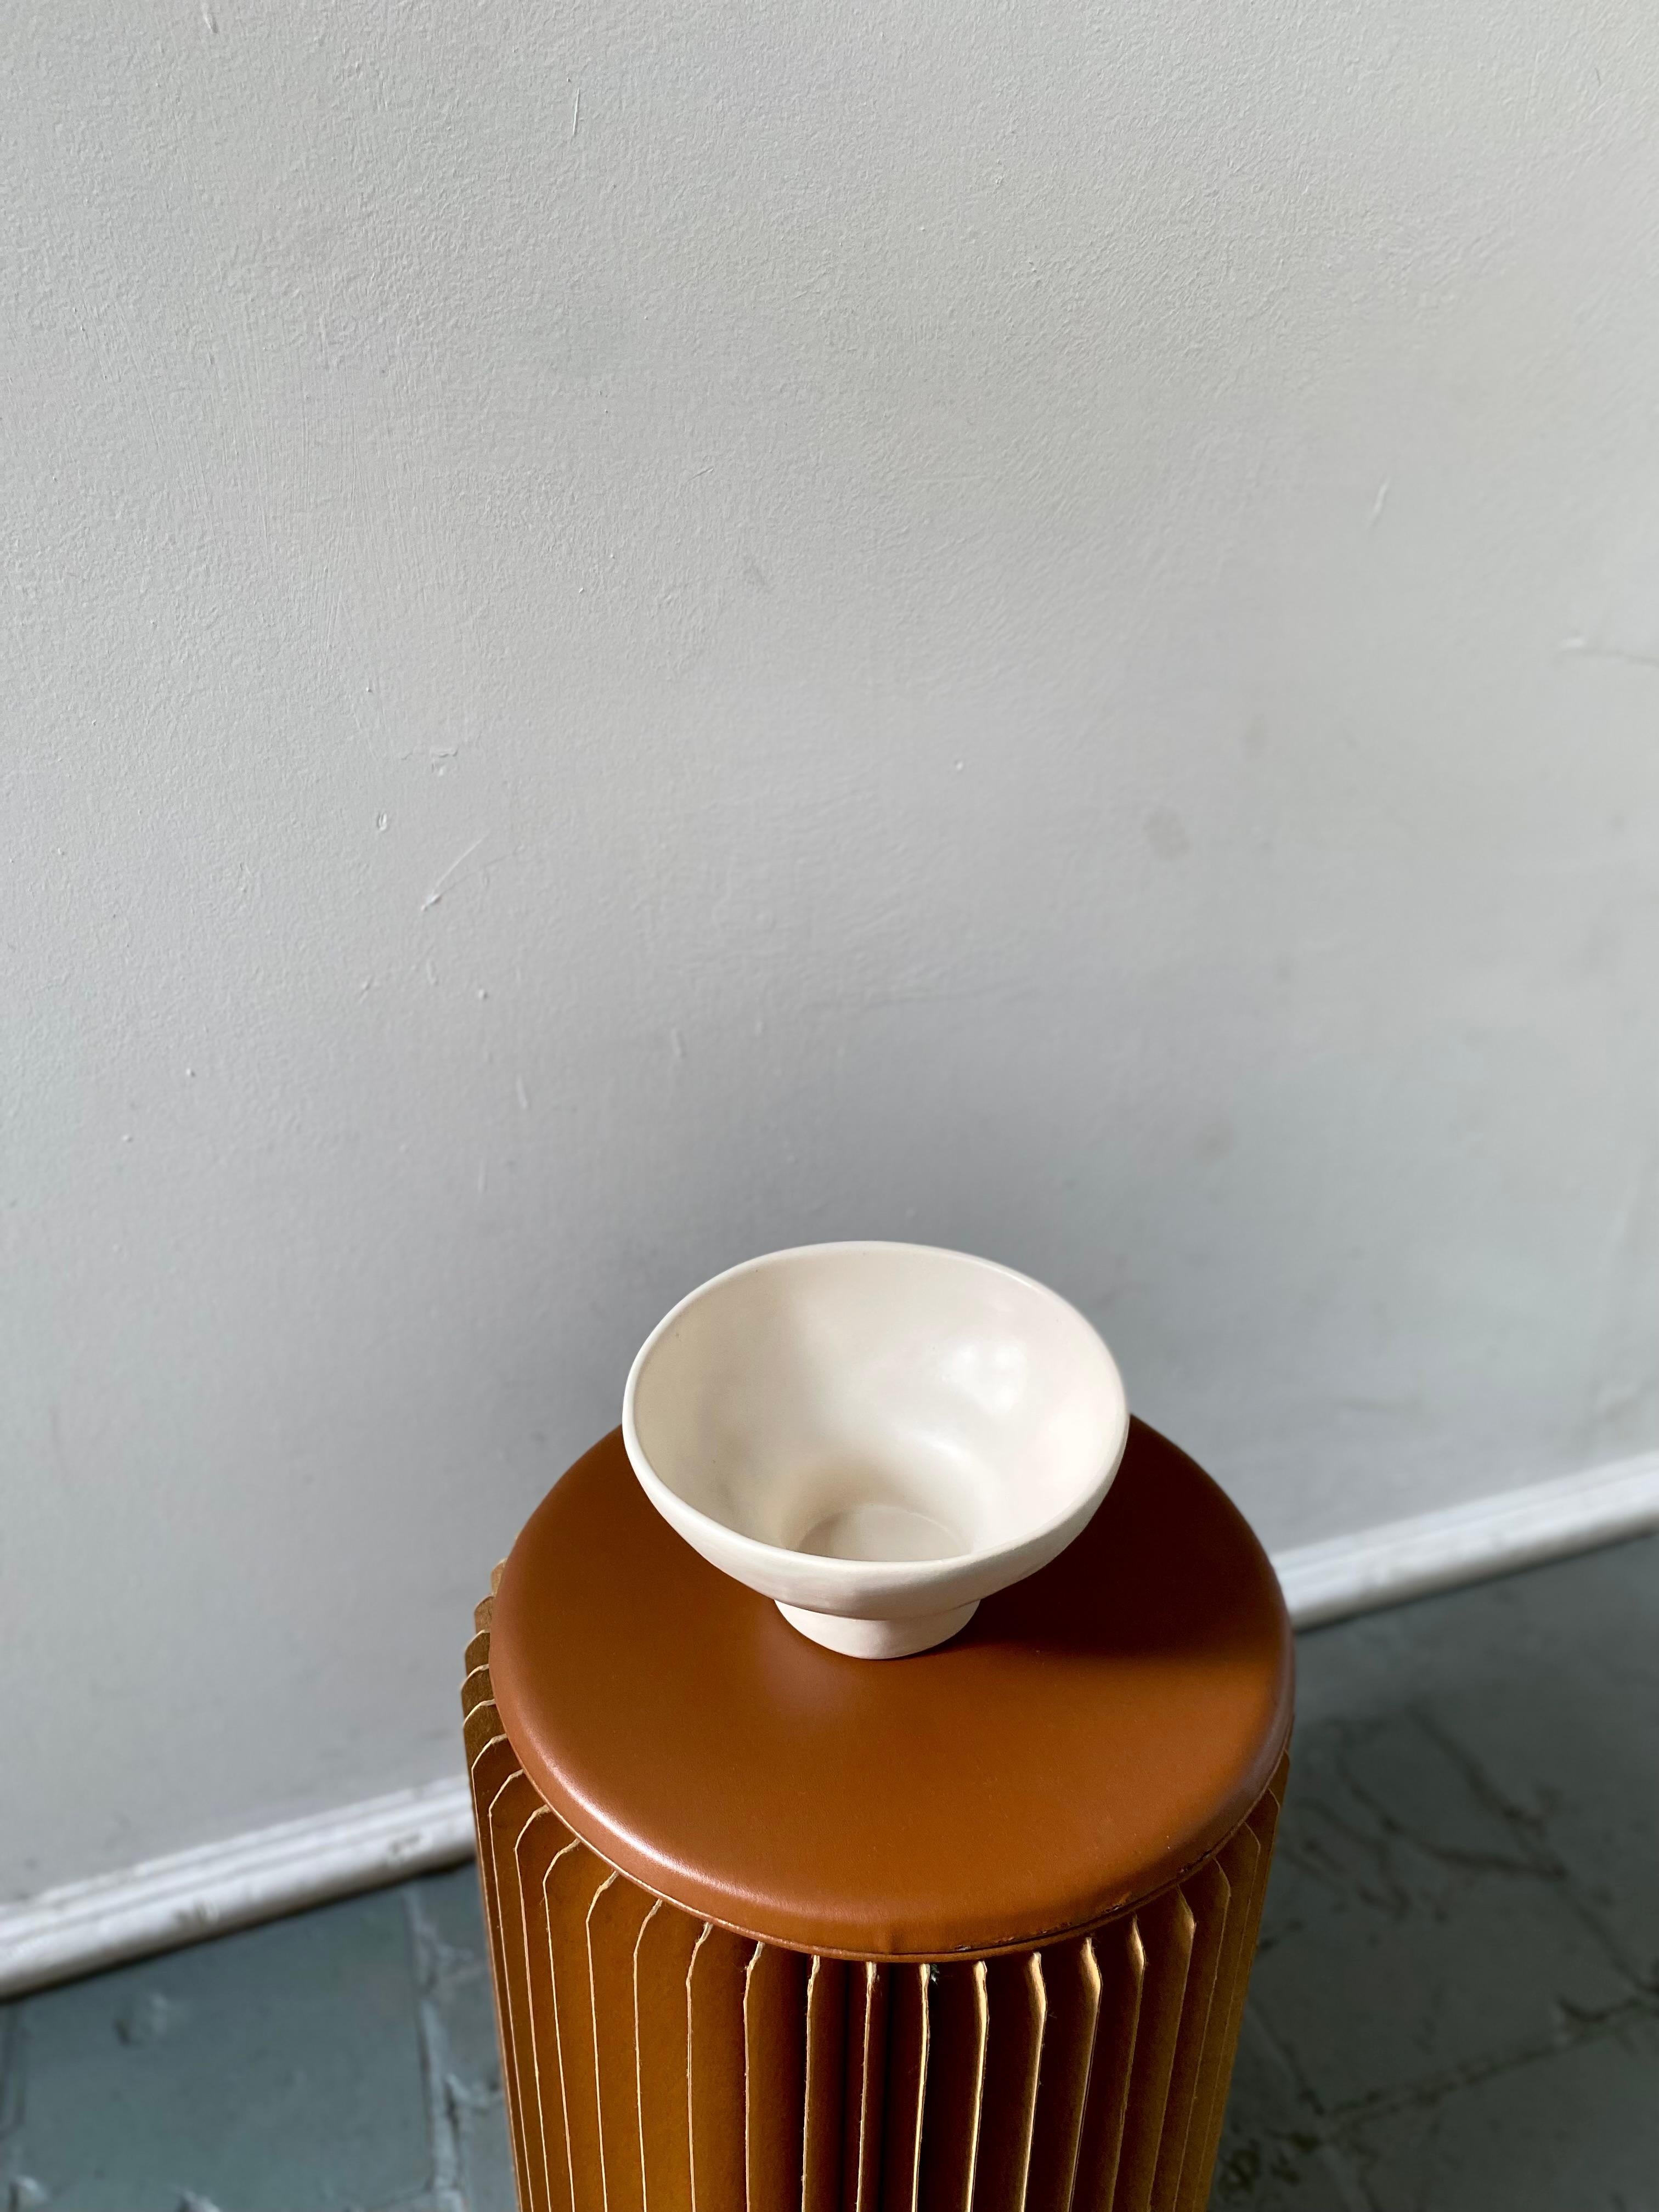 Introducing our handmade ceramic bowl with an organic shape, featuring a matte neutral finish. It's perfect for enjoying ramen and serving fruits. This unique and functional piece adds a touch of charm to any home decor. A versatile addition to your